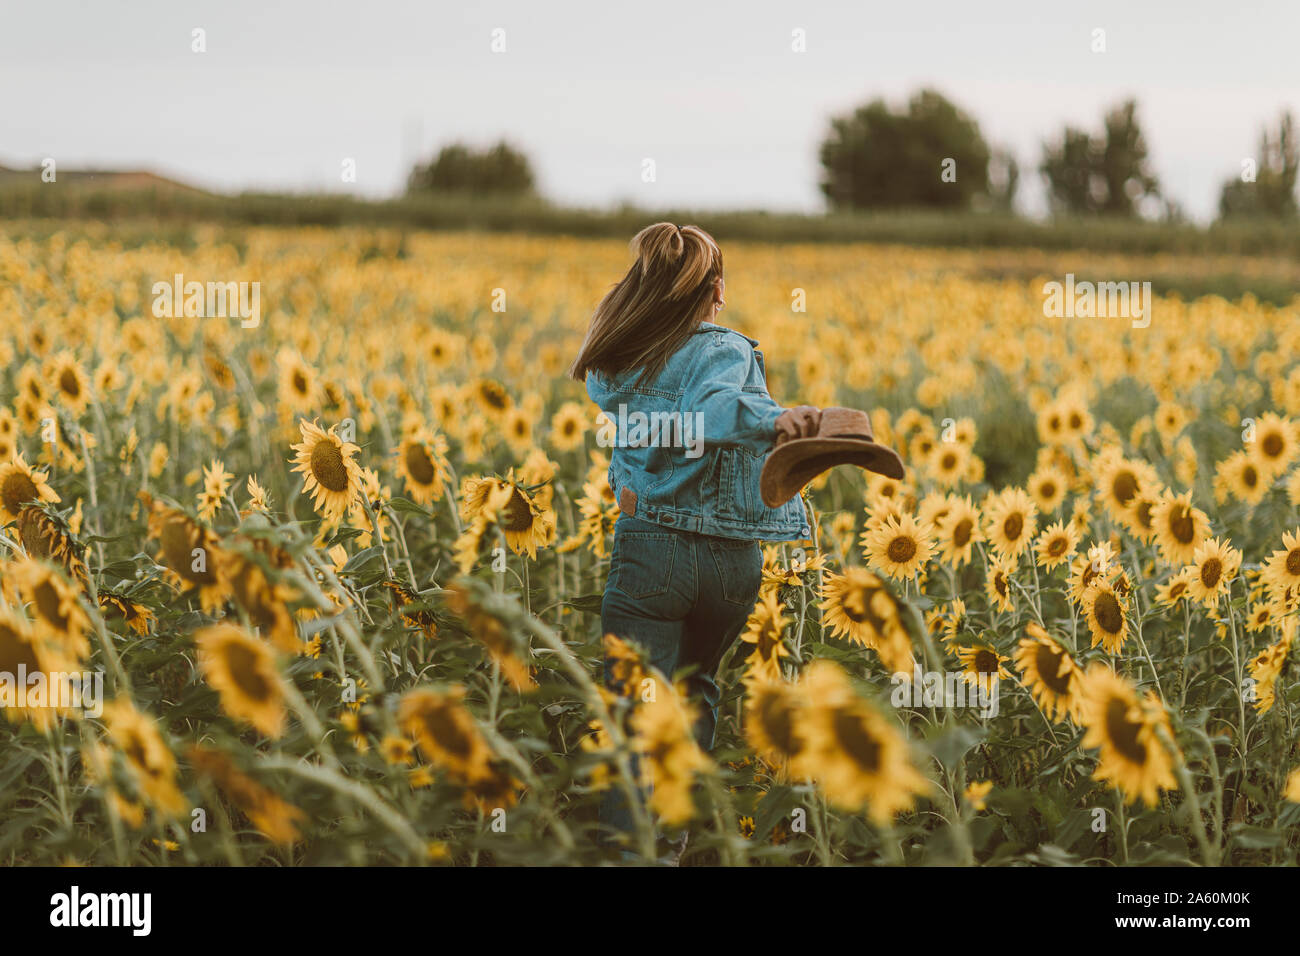 Young woman with blue denim jacket and hat running in a field of sunflowers Stock Photo